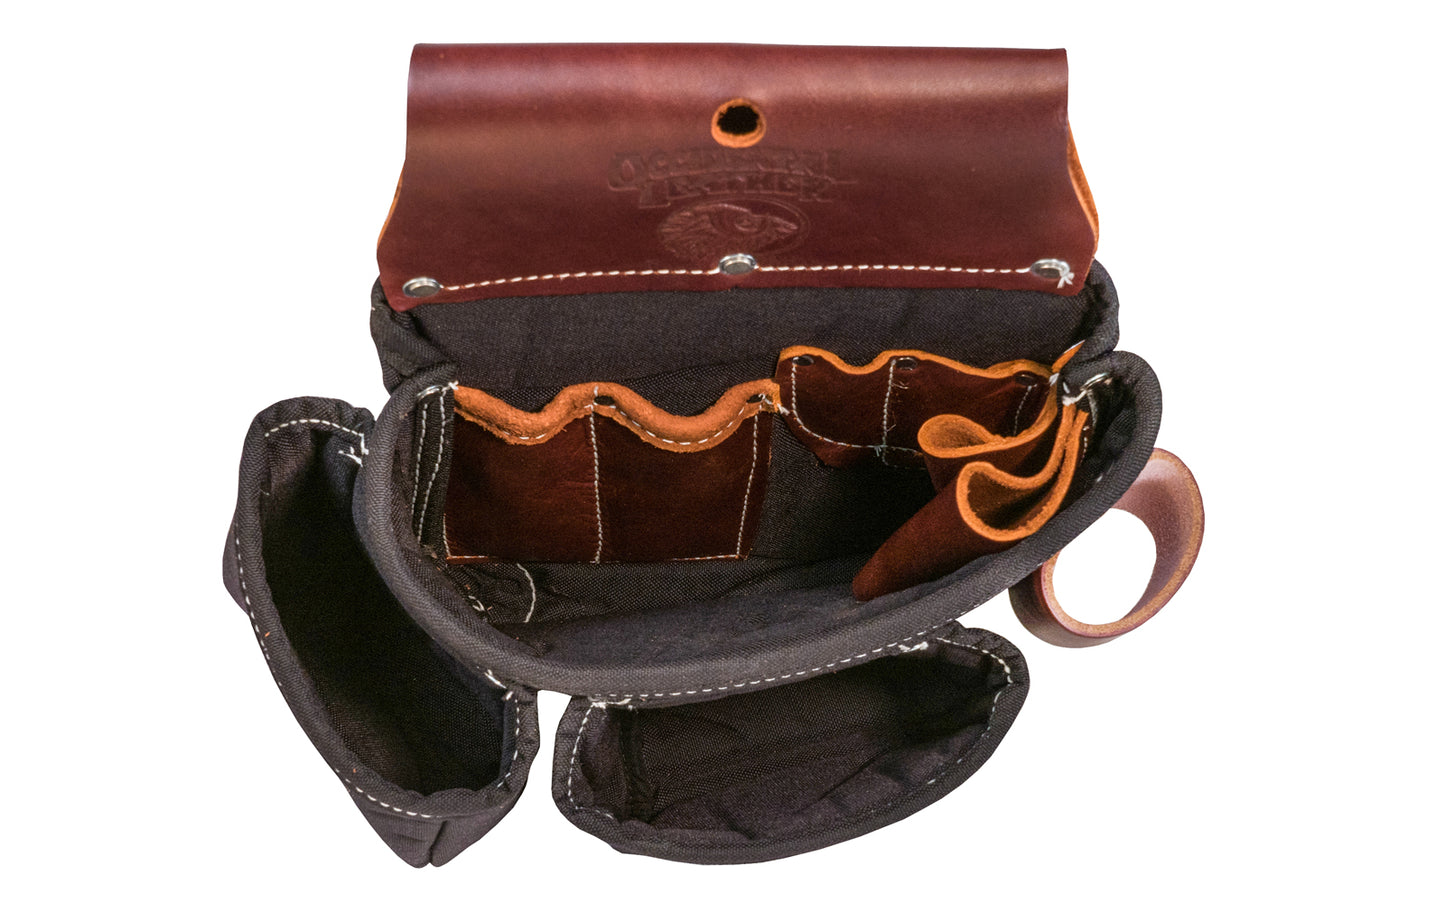 Occidental Leather 3-Pouch Tool Bag ~ Model B8017DB - Fits a 3" work belt - Pouch - Three pouch tool bag features holders for pencils, work knife, chisel, level, lumber crayon, heavy duty hammer loop. Main tool bag corners are reinforced with Occidental's trademark "OxyRed" leather. Made of Nylon & genuine Leather